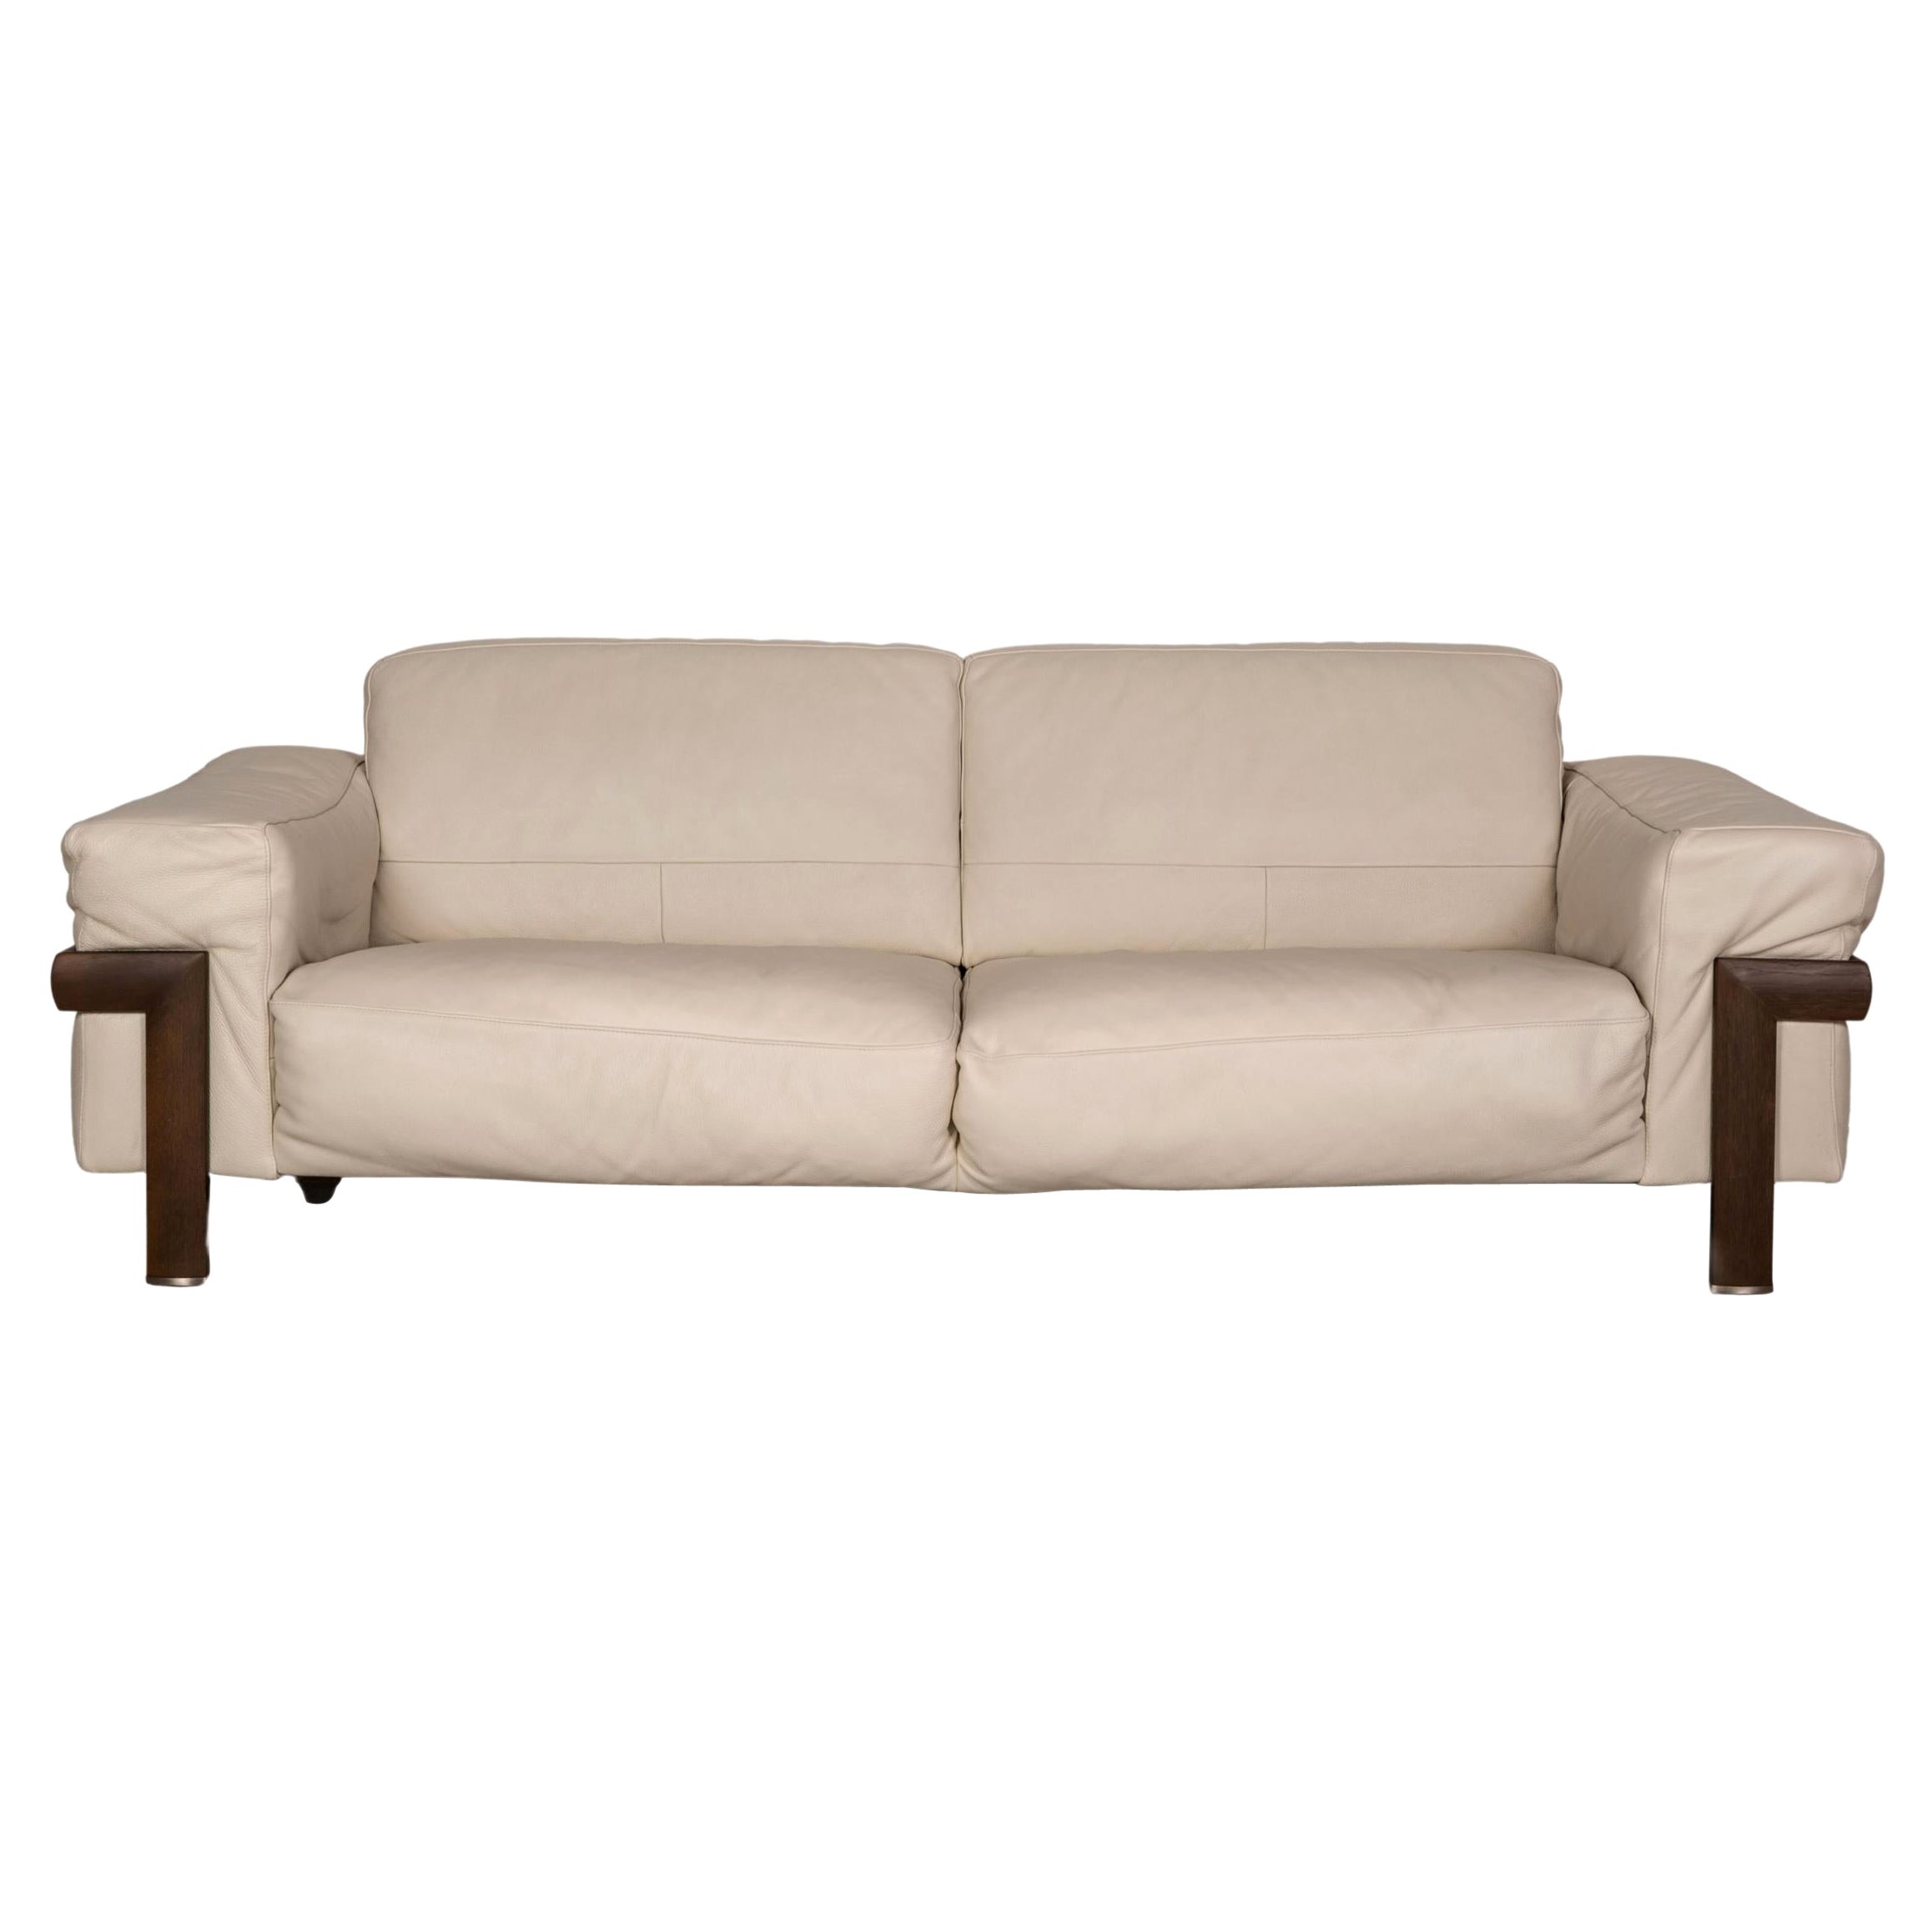 Natuzzi Leather Sofa Cream Two-Seater Couch For Sale